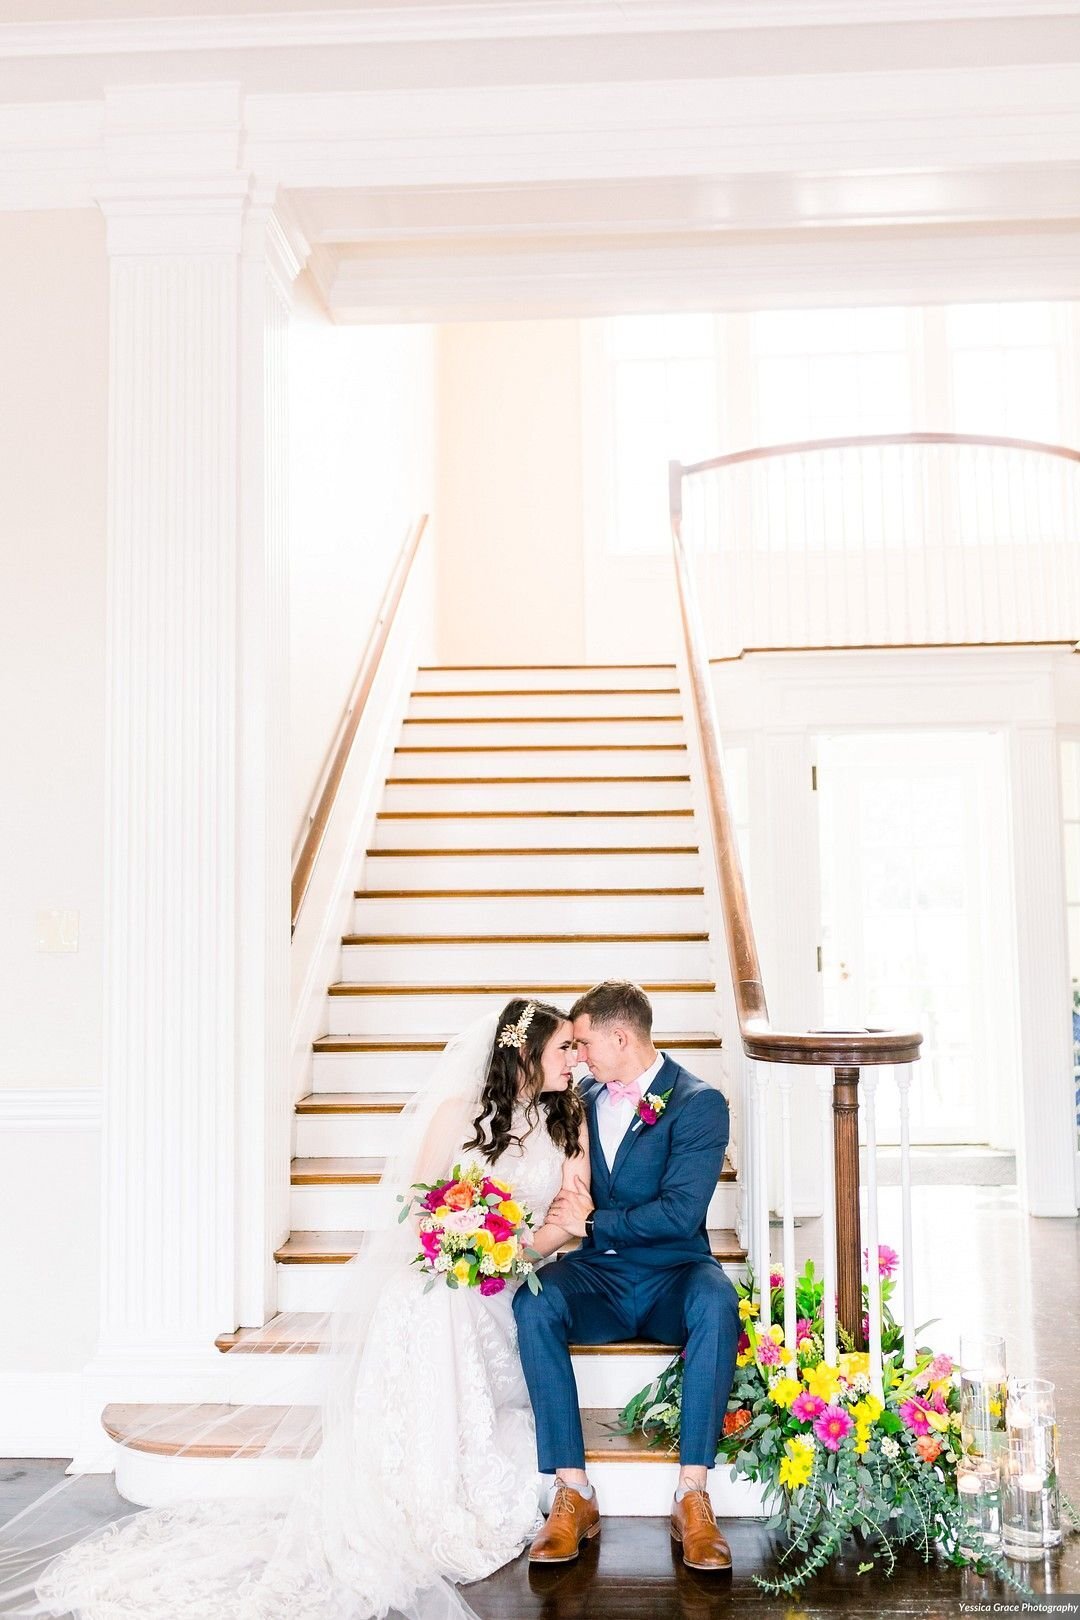 Colorful Pink & Yellow Wedding at the Separk Mansion in Charlotte, NC_Yessica Grace Photography_CZ6A6728_big